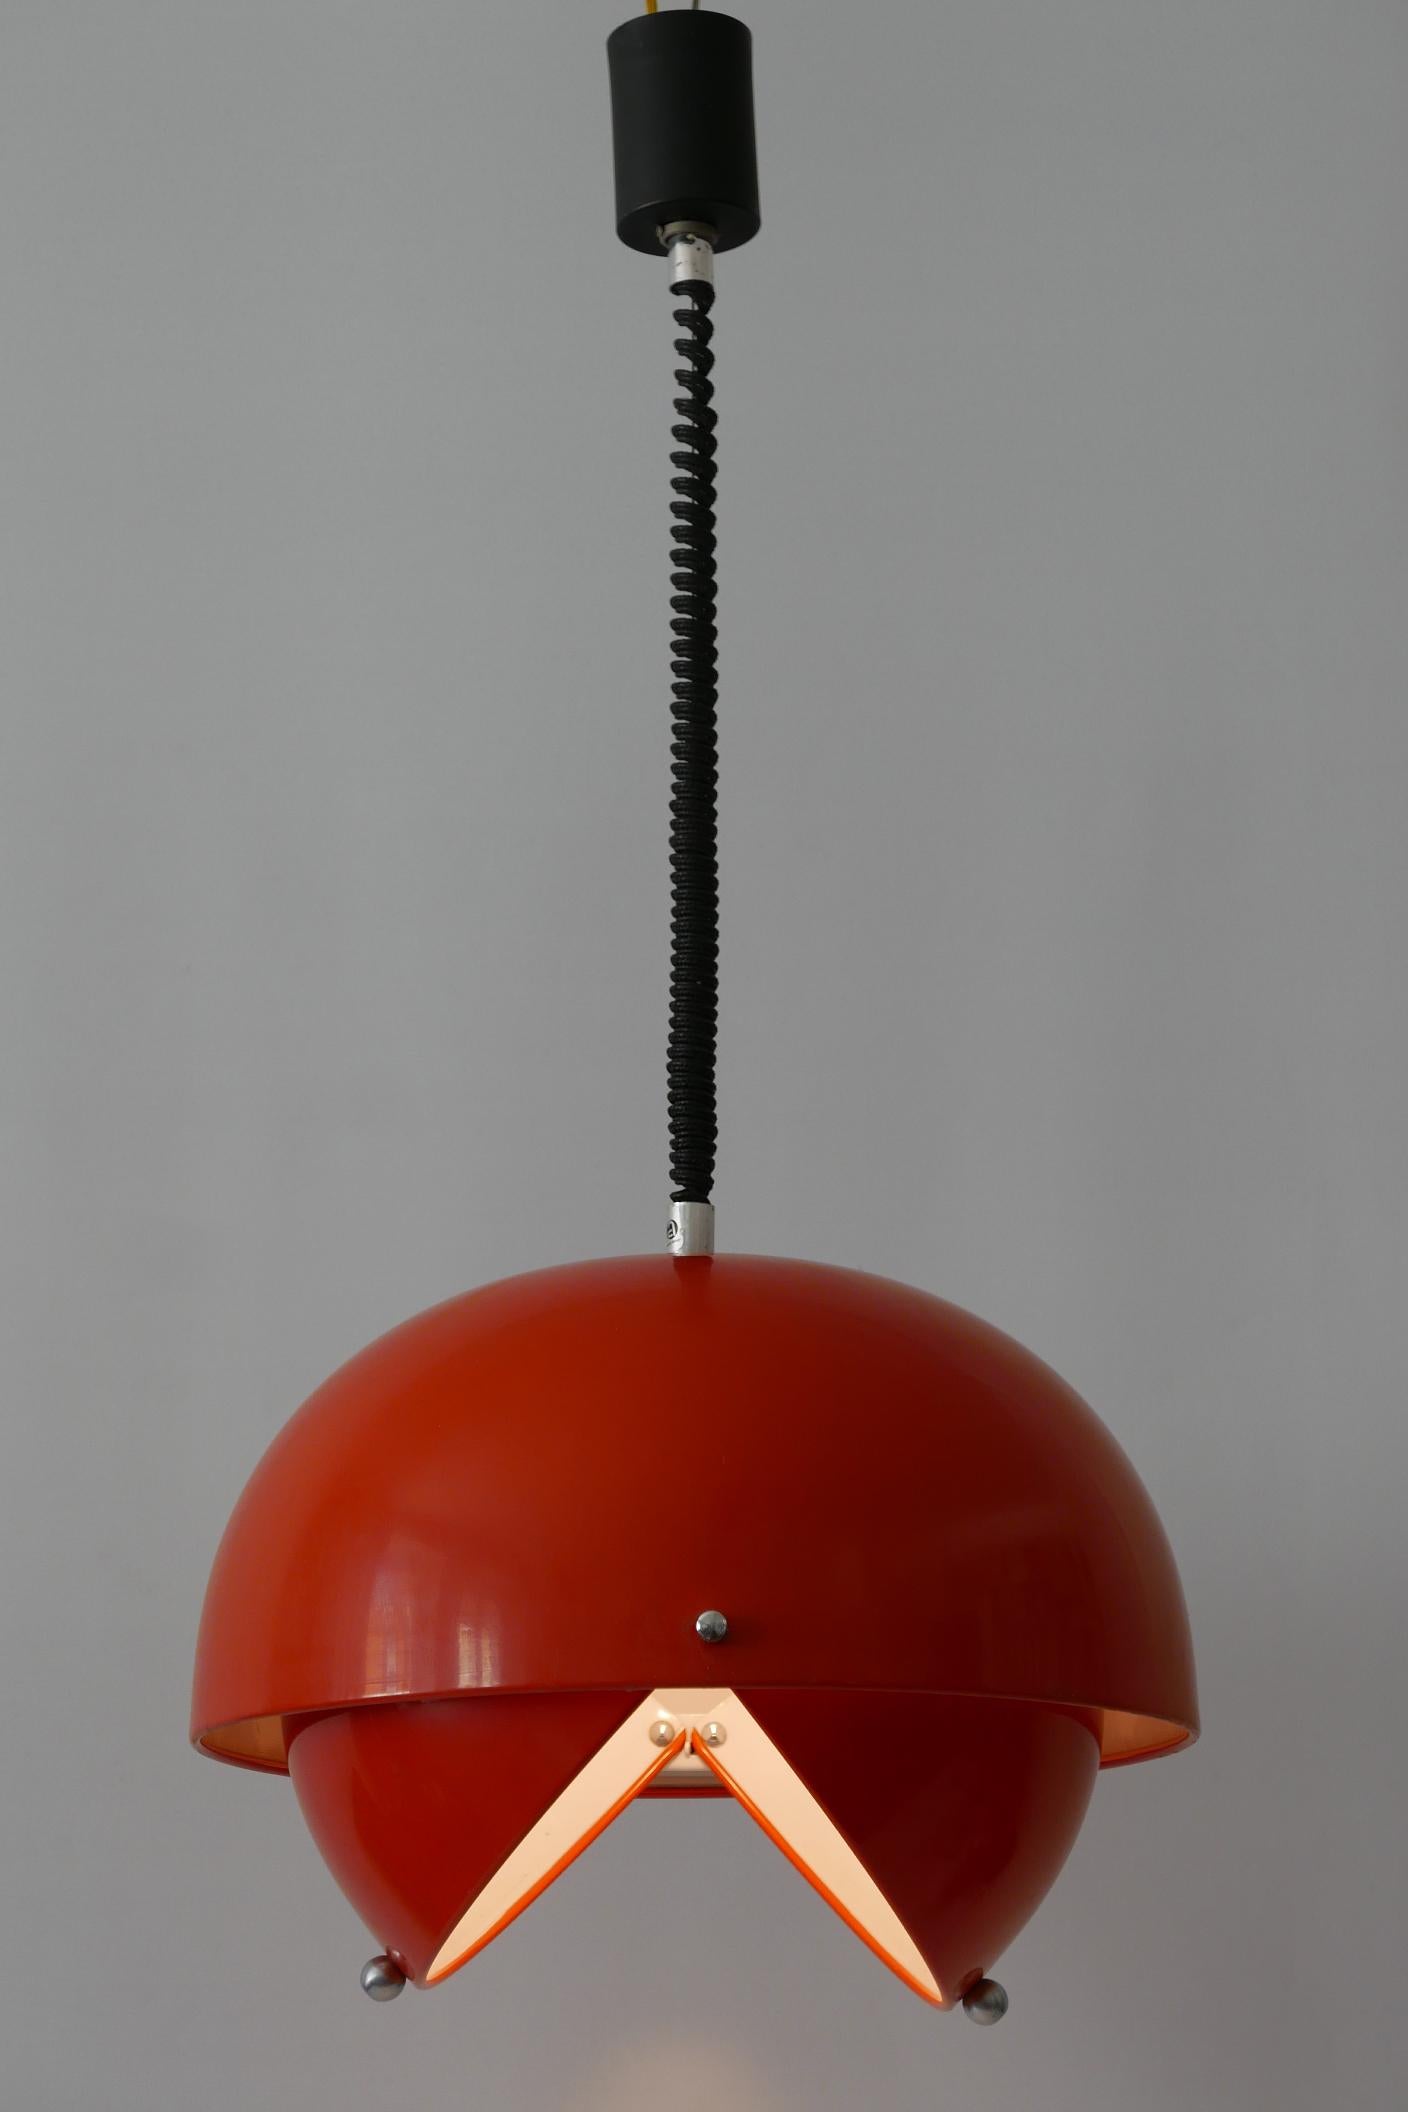 Mid-20th Century Amazing Mid-Century Modern Pendant Lamp or Hanging Light by Archi Design Italy For Sale